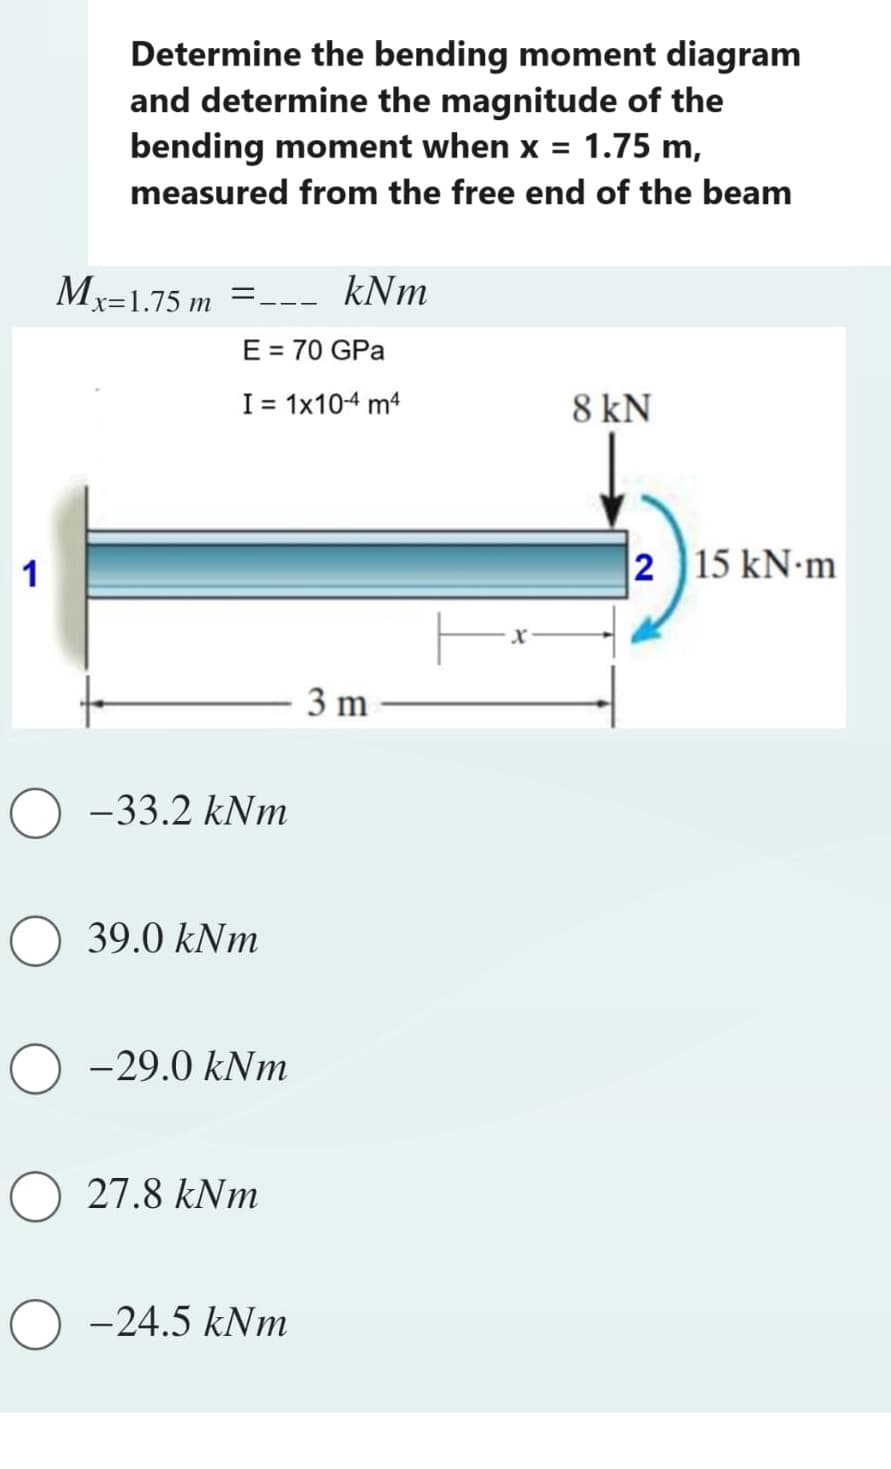 1
Determine the bending moment diagram
and determine the magnitude of the
bending moment when x = 1.75 m,
measured from the free end of the beam
Mx=1.75 m =--- kNm
E = 70 GPa
I = 1x10-4 m4
-33.2 kNm
O 39.0 kNm
O-29.0 kNm
O 27.8 kNm
-24.5 kNm
3 m
8 kN
215 kN-m